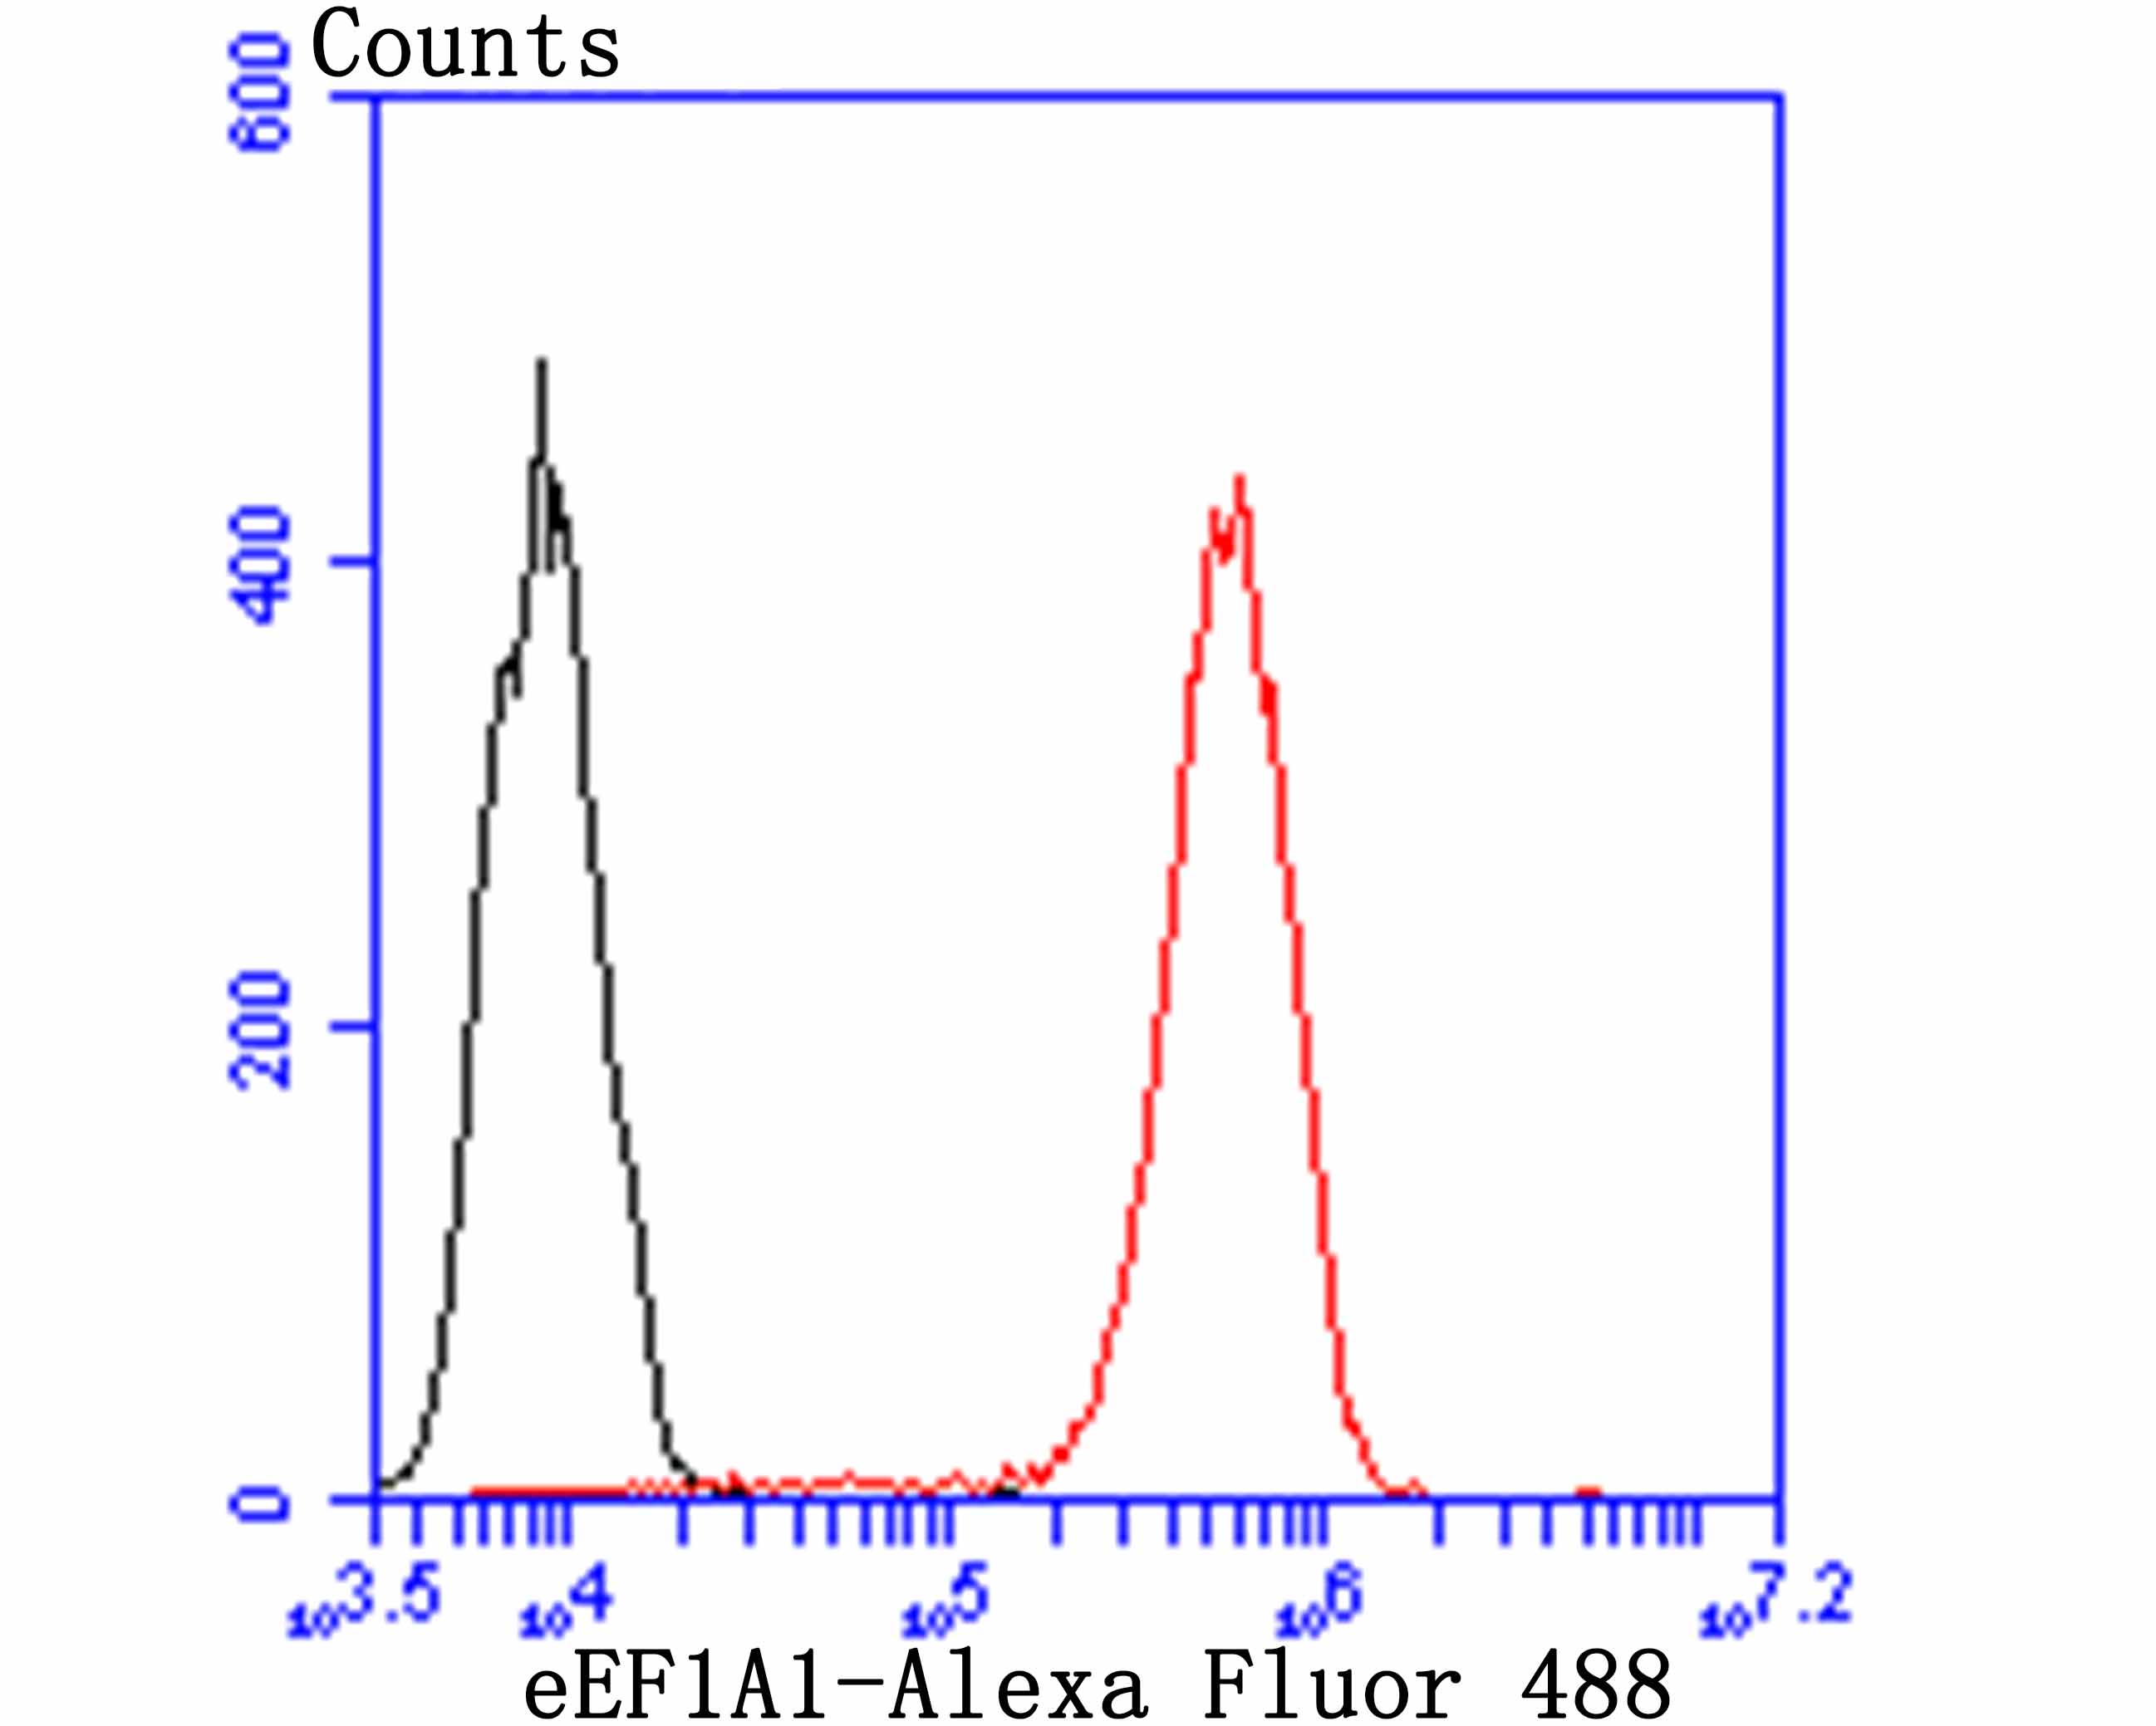 Flow cytometric analysis of eEF1A1 was done on THP-1 cells. The cells were fixed, permeabilized and stained with the primary antibody (ET7107-75, 1/50) (red). After incubation of the primary antibody at room temperature for an hour, the cells were stained with a Alexa Fluor 488-conjugated Goat anti-Rabbit IgG Secondary antibody at 1/1000 dilution for 30 minutes.Unlabelled sample was used as a control (cells without incubation with primary antibody; black).